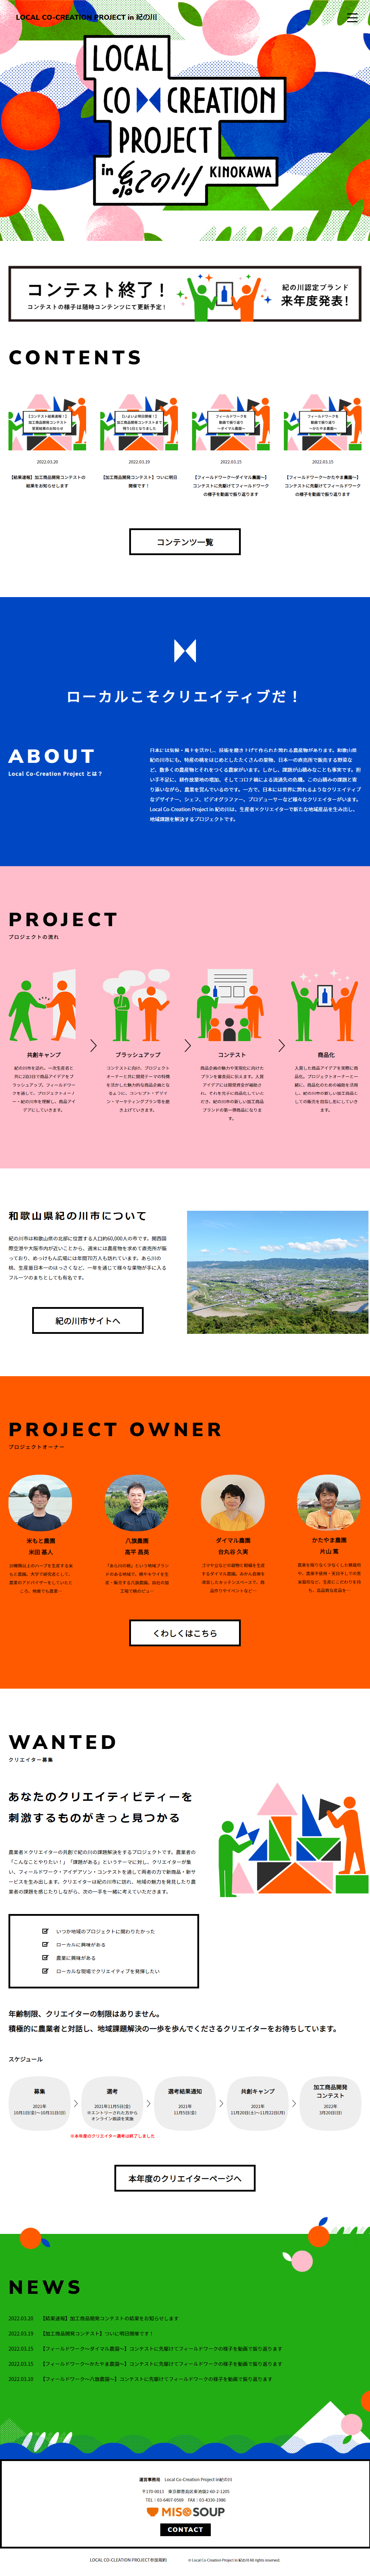 Local Co-Creation Project in紀の川_pc_1